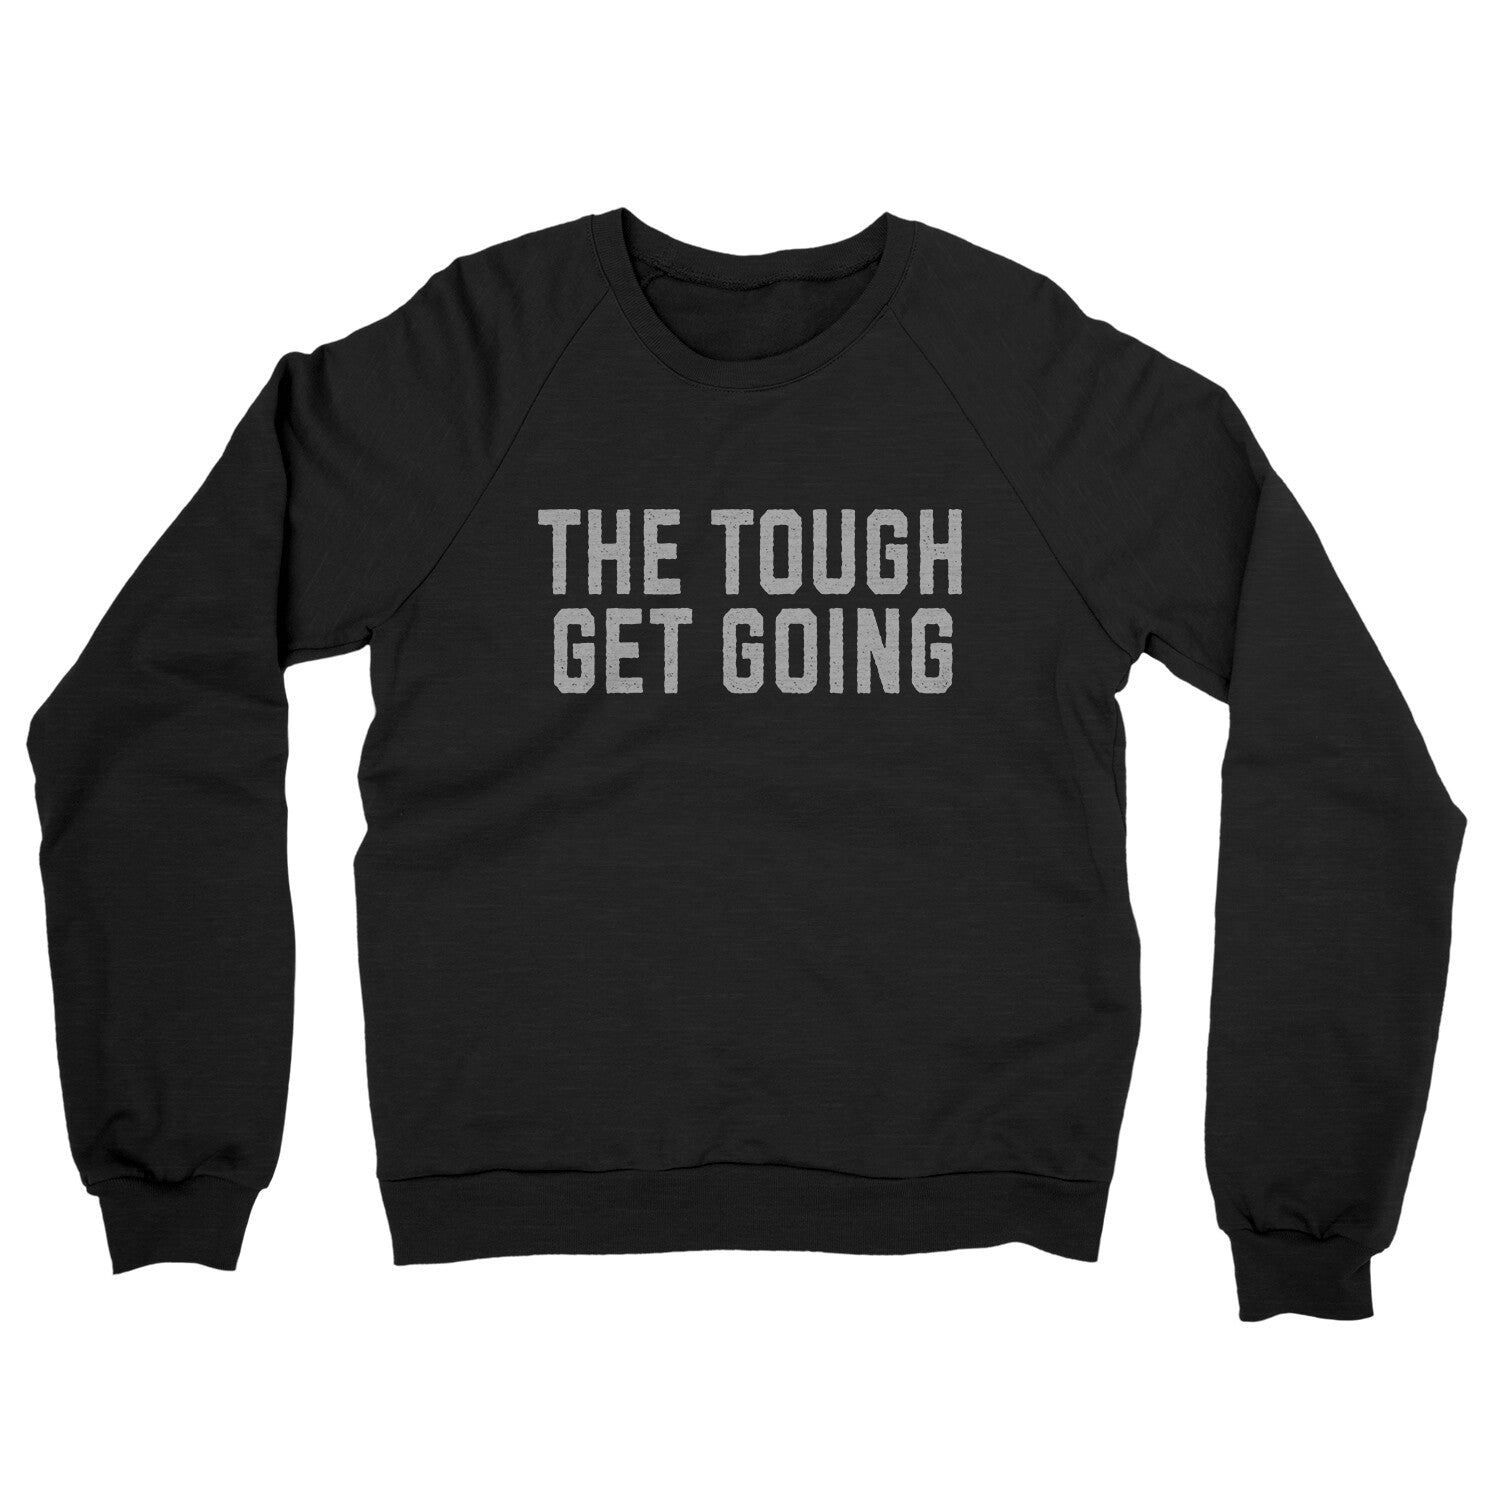 The Tough Get Going in Black Color